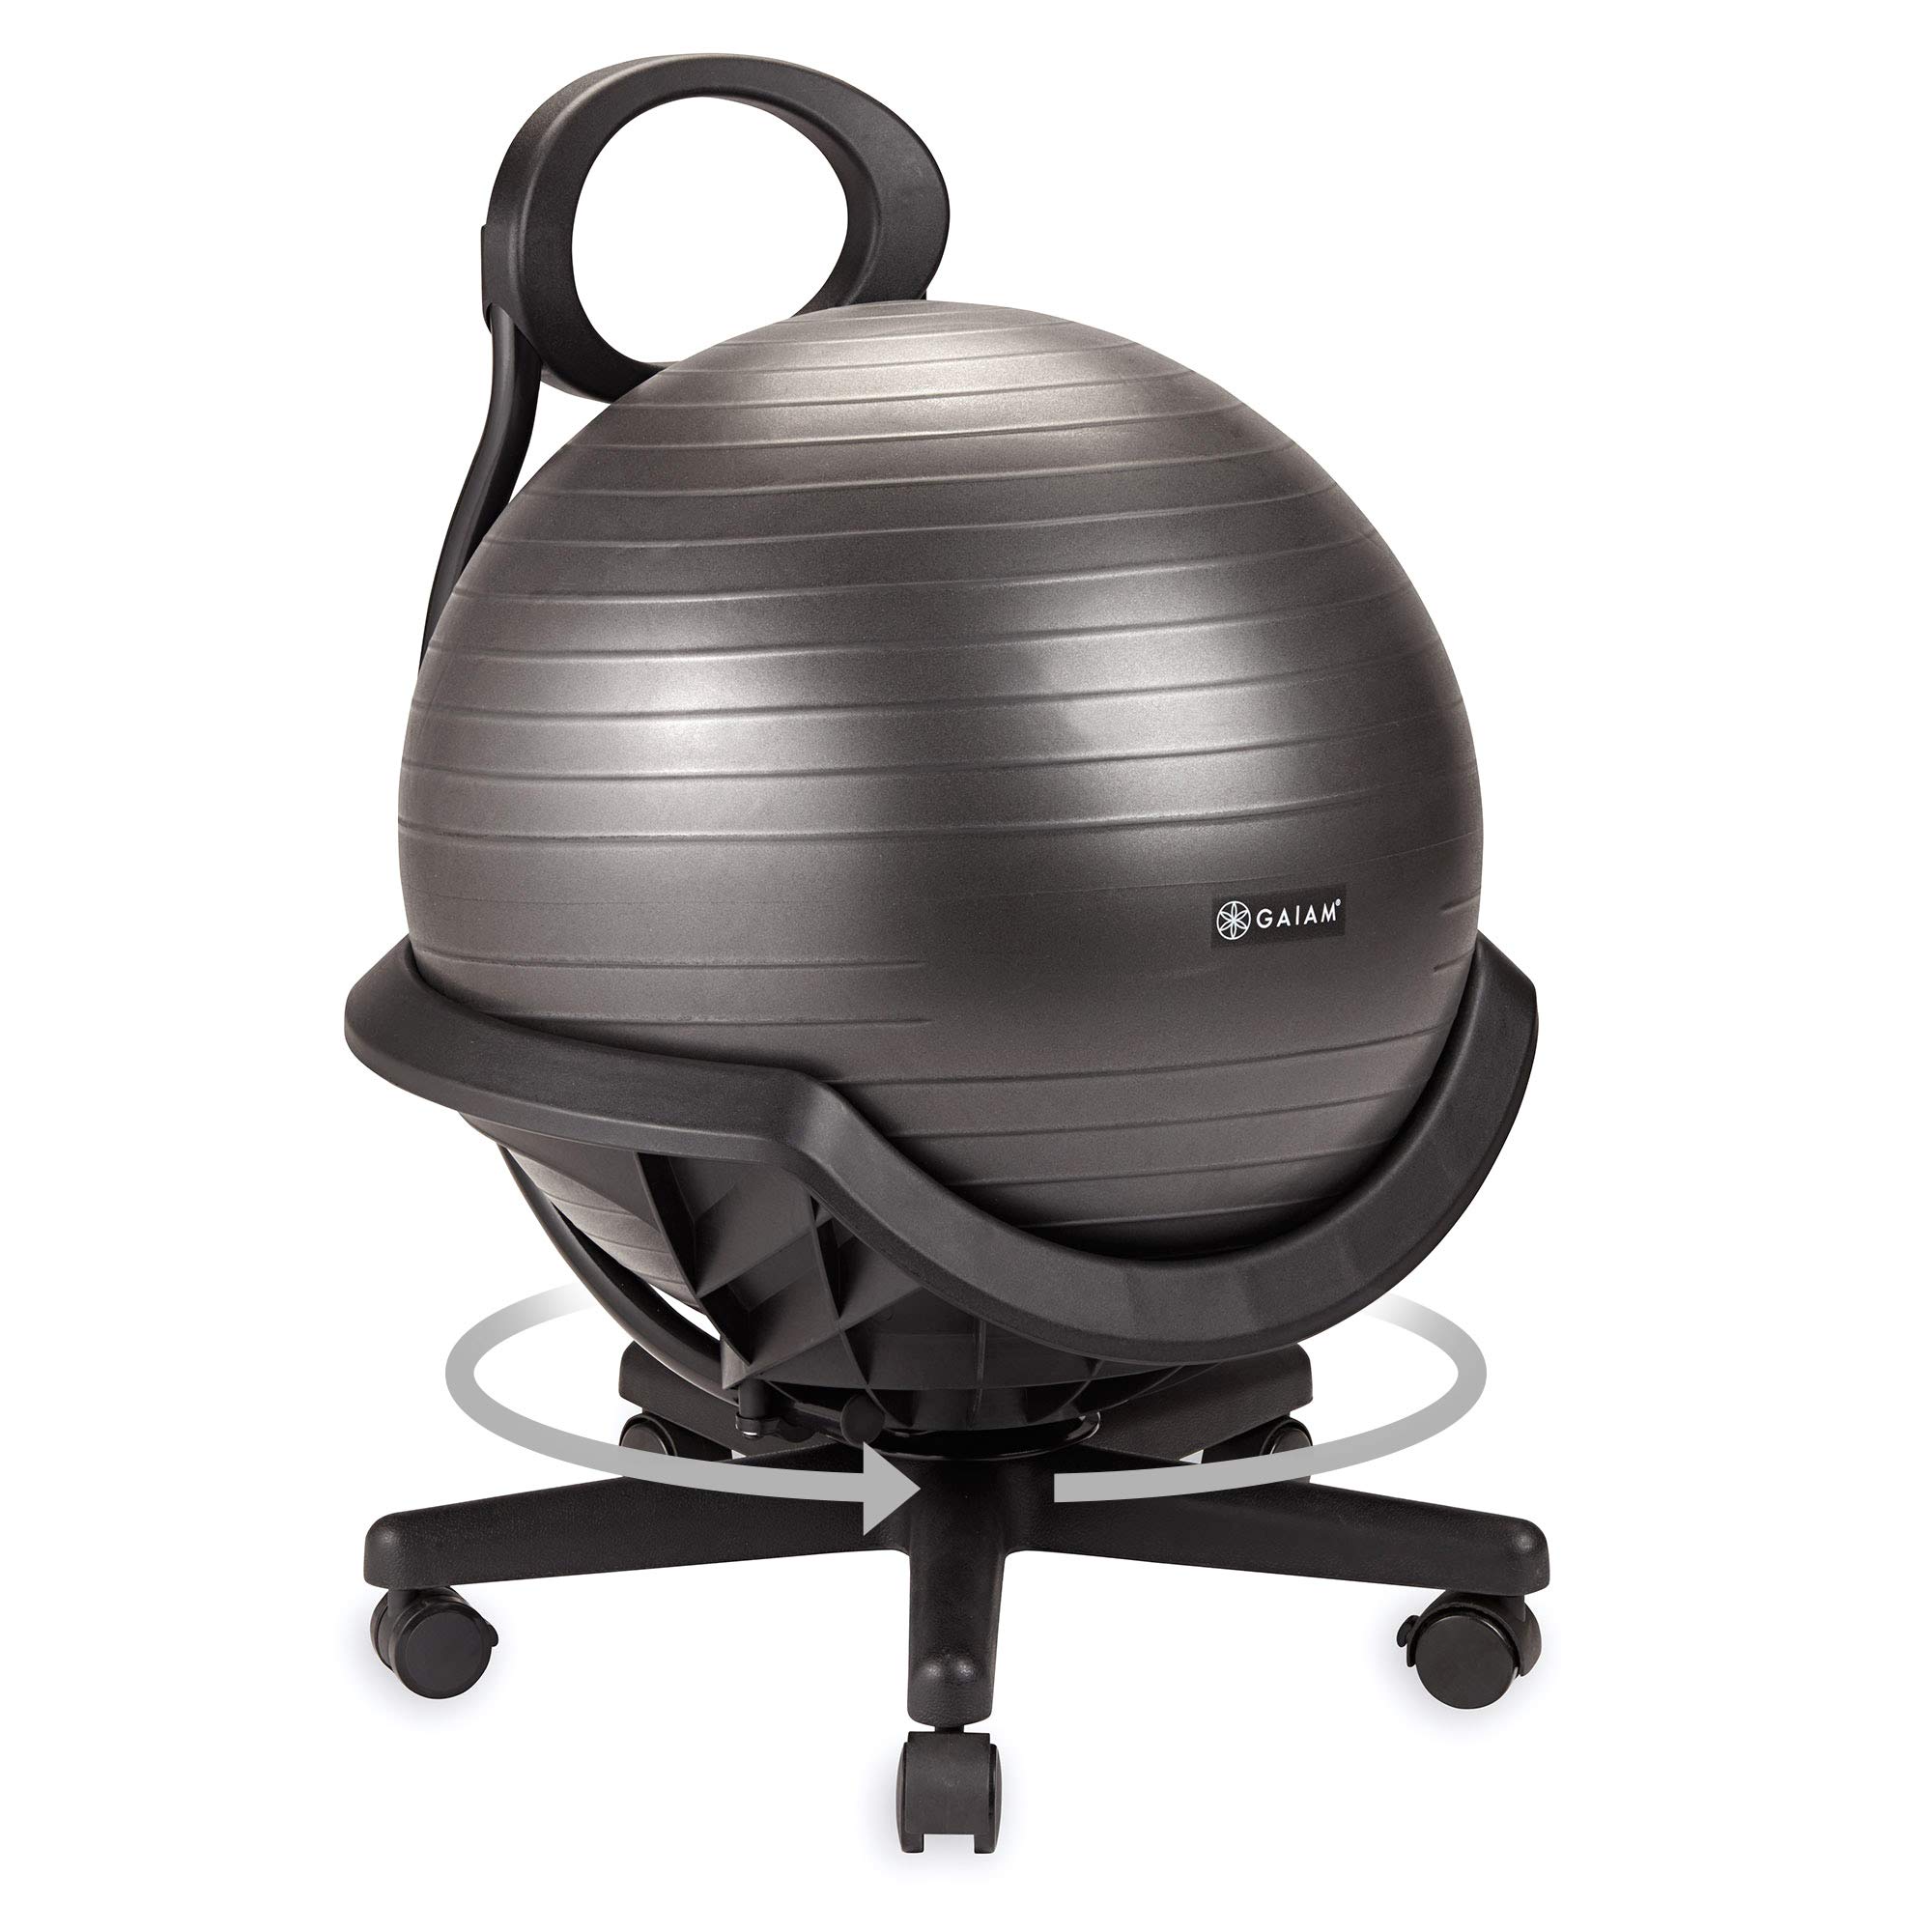 gaiam Ultimate Balance Ball chair with Swivel Base - Premium Exercise Stability Yoga Ball Ergonomic chair for Home and Office De